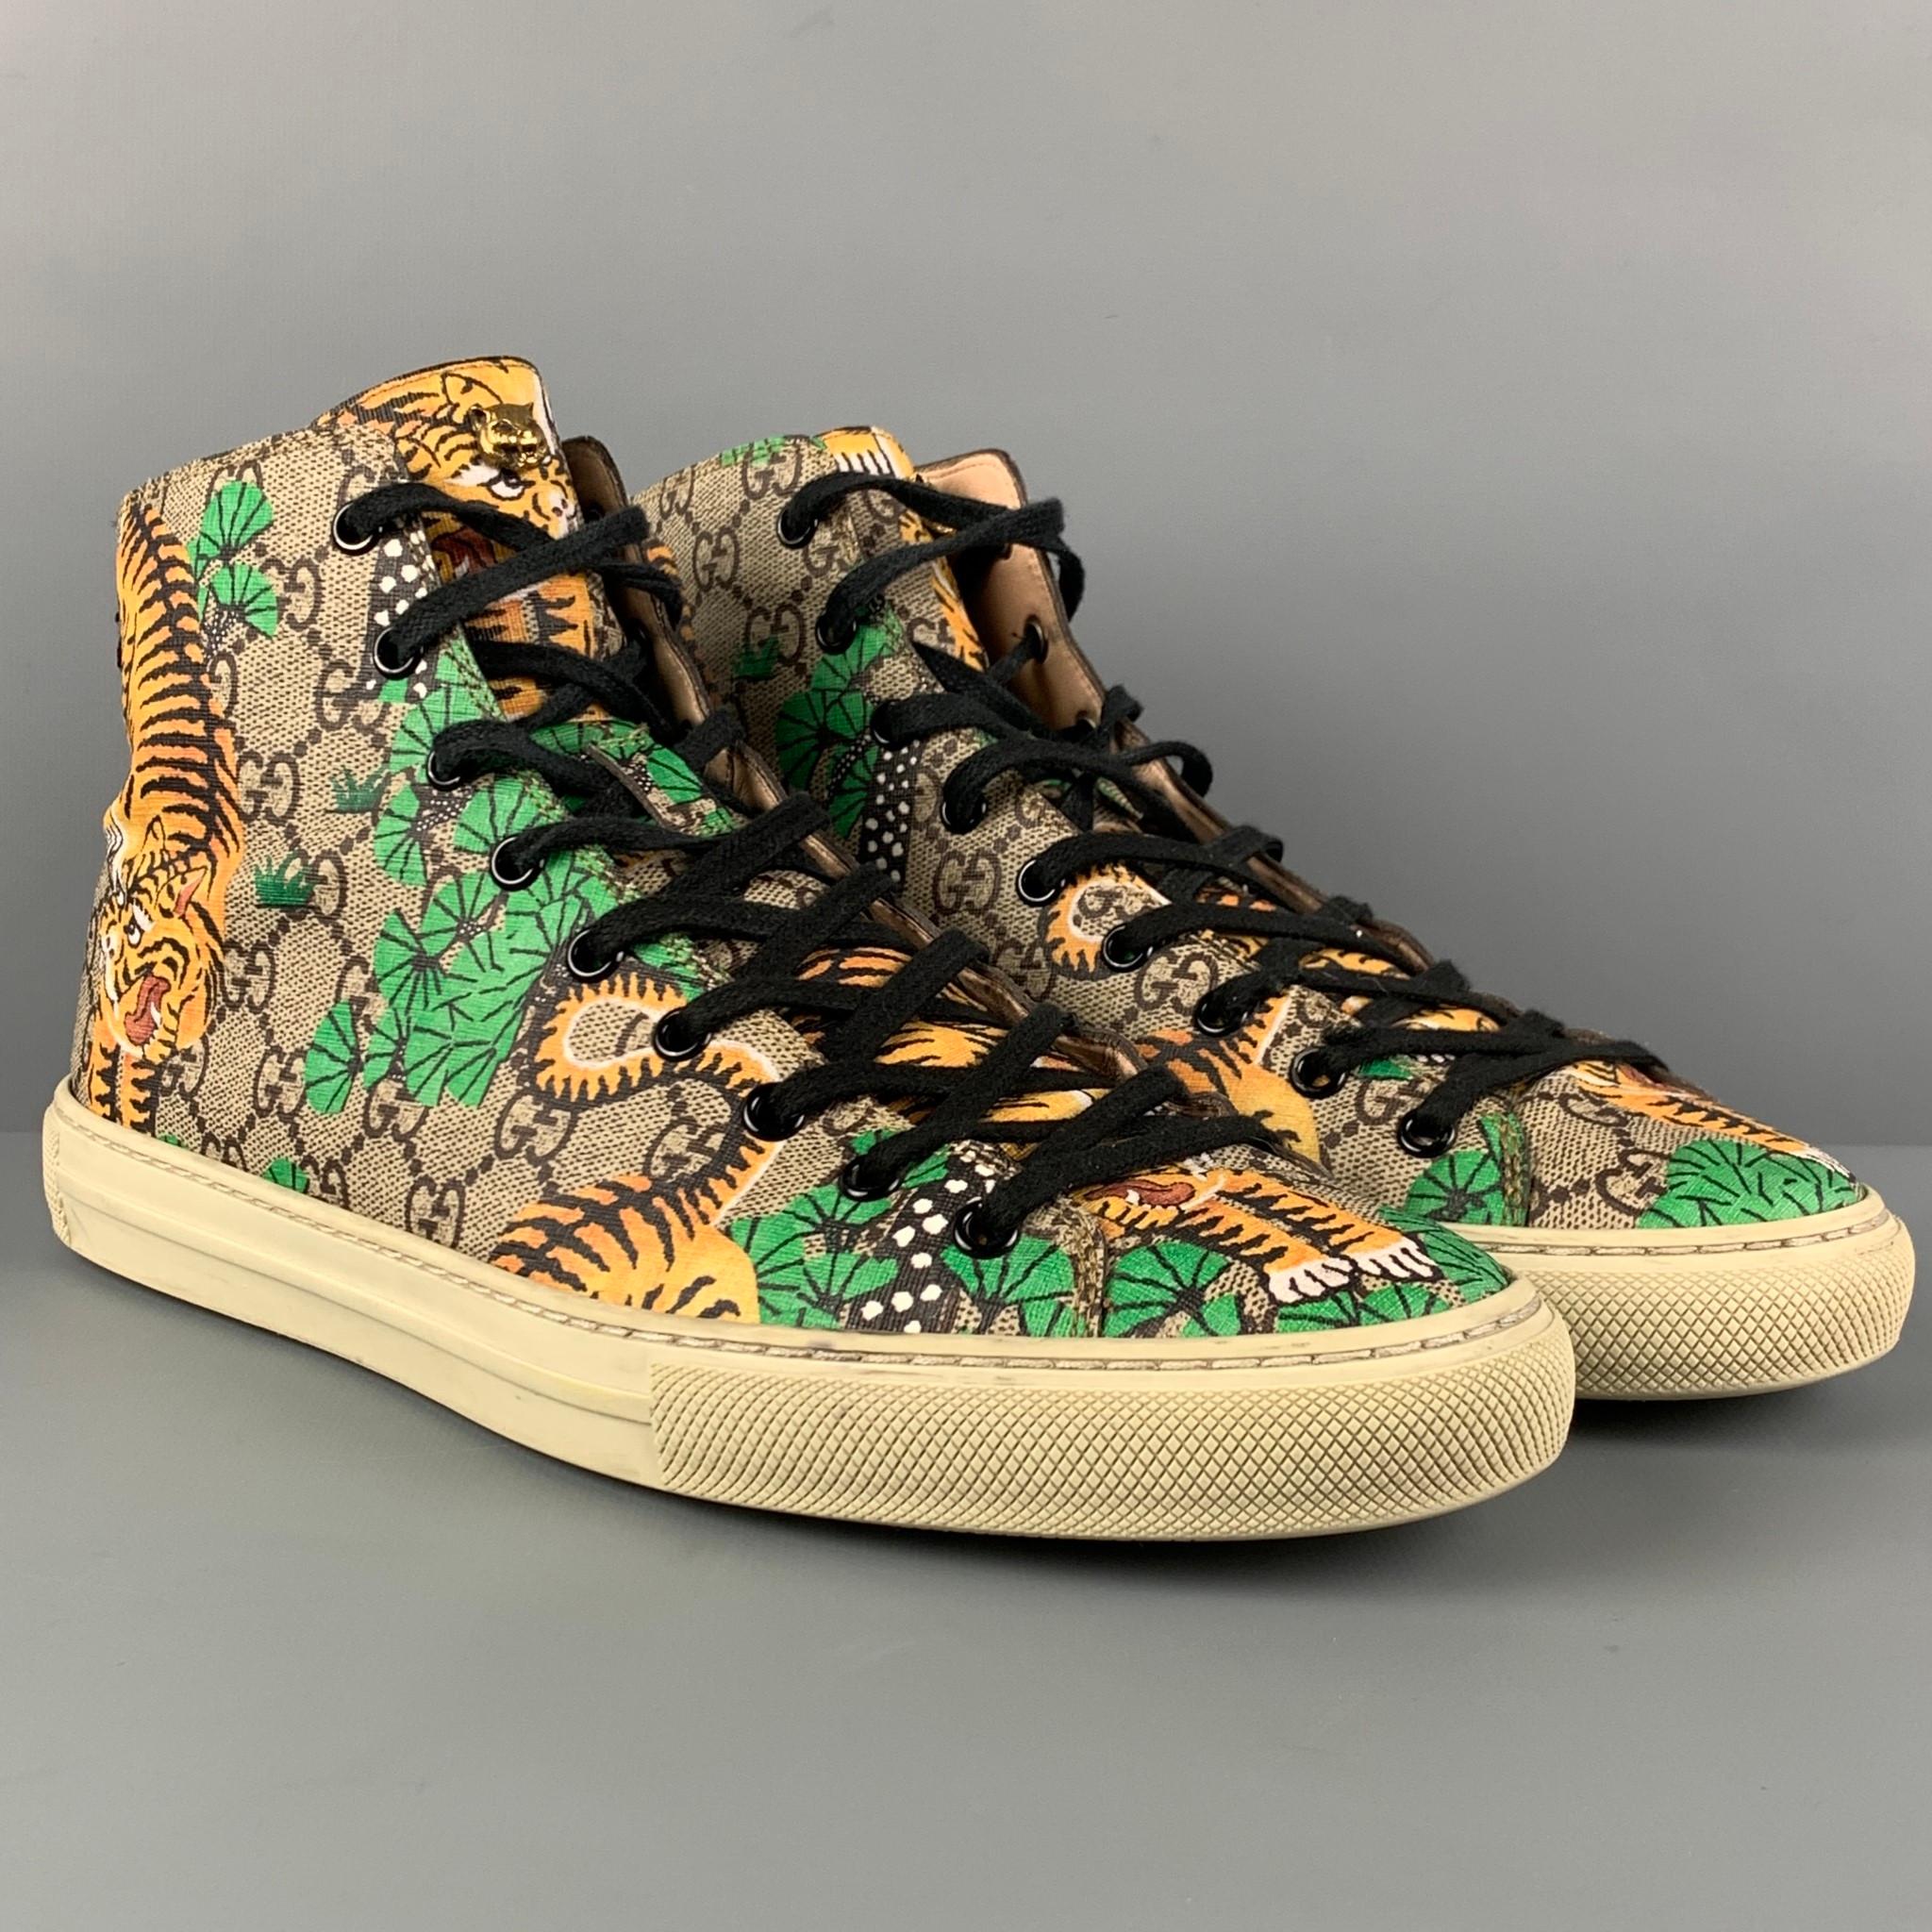 GUCCI 'Bengal Tiger GG' sneakers comes in a brown & green monogram coated canvas featuring a high-top style, rubber sole, and a lace up closure. Made in Italy. 

Very Good Pre-Owned Condition.
Marked: 9 G

Outsole: 11.5 in. x 4 in. 